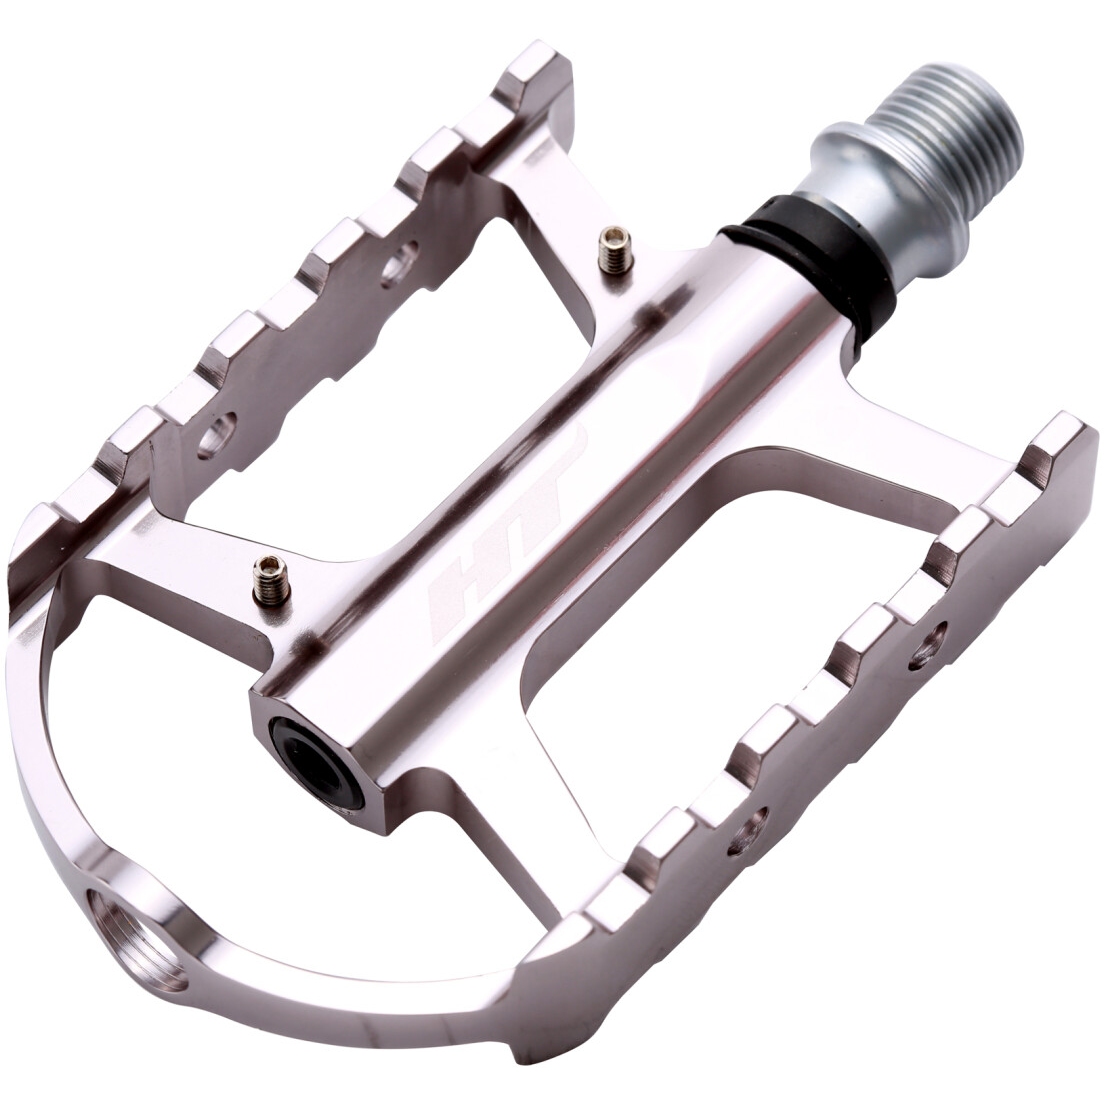 Picture of HT ARS02 Cheetah-S Pedals - grey